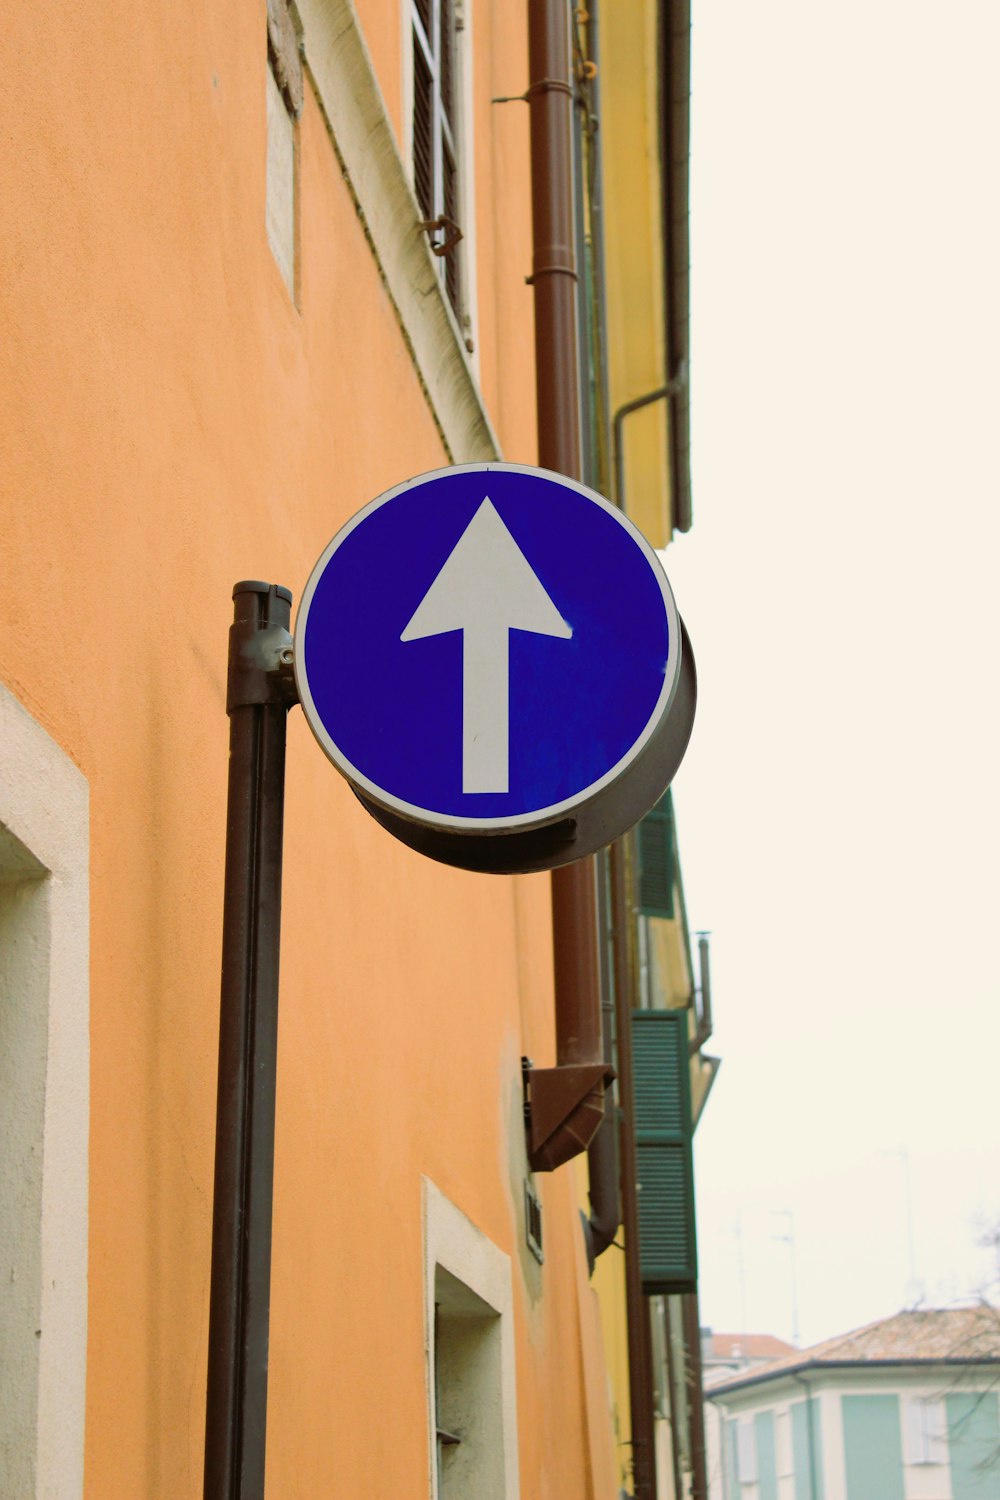 a blue sign with an arrow pointing to the right